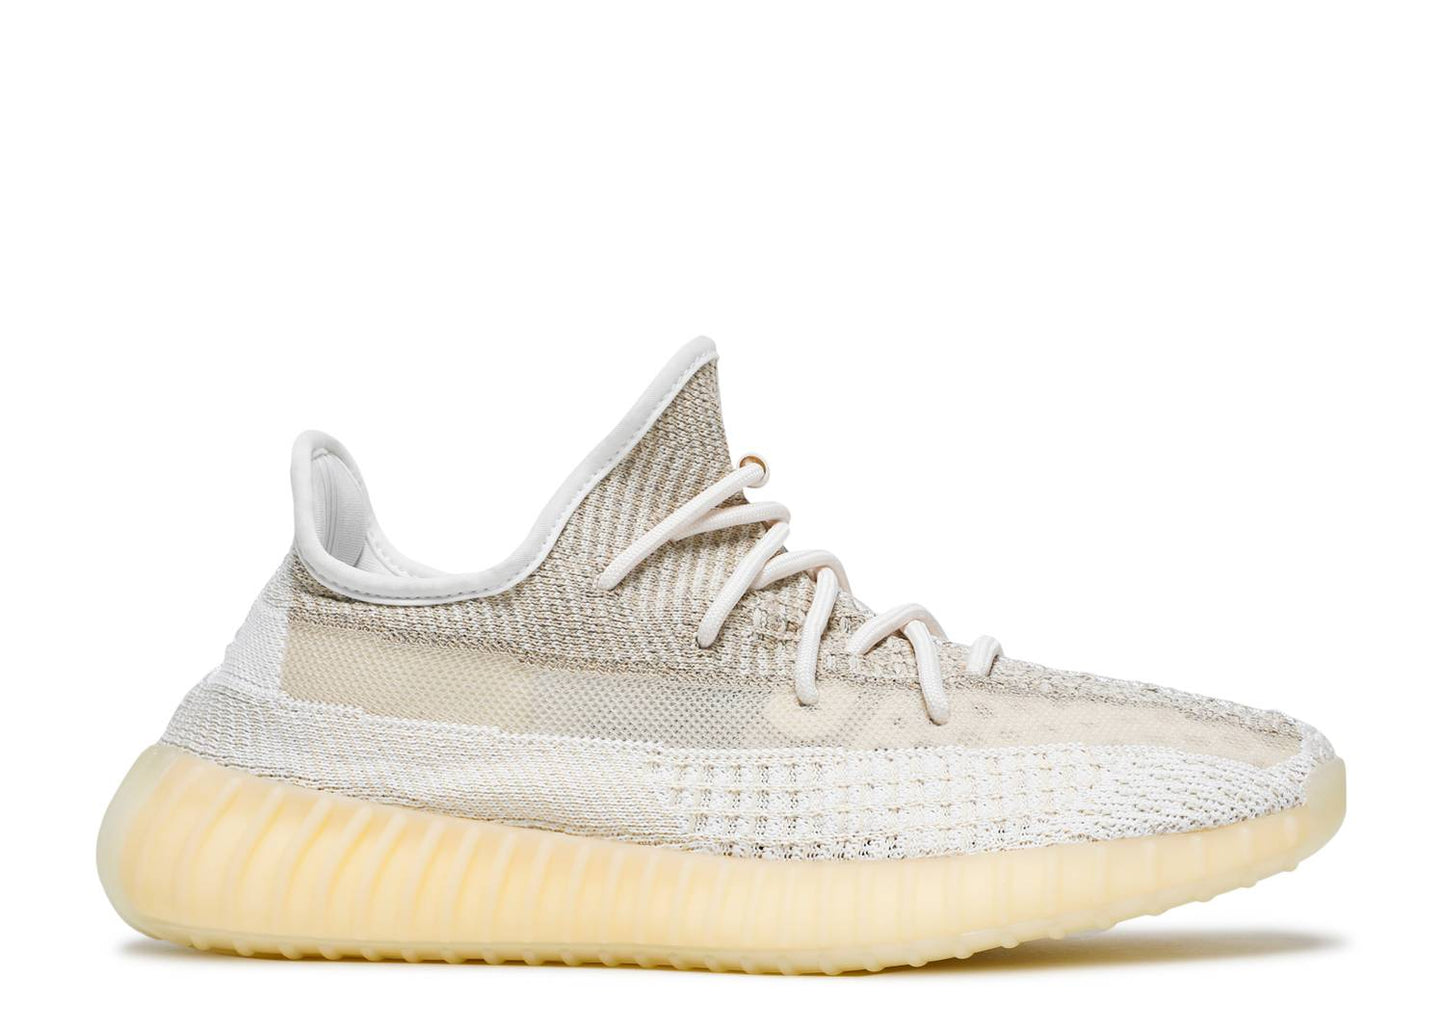 adidas Yeezy Boost 350 v2 “Natural”